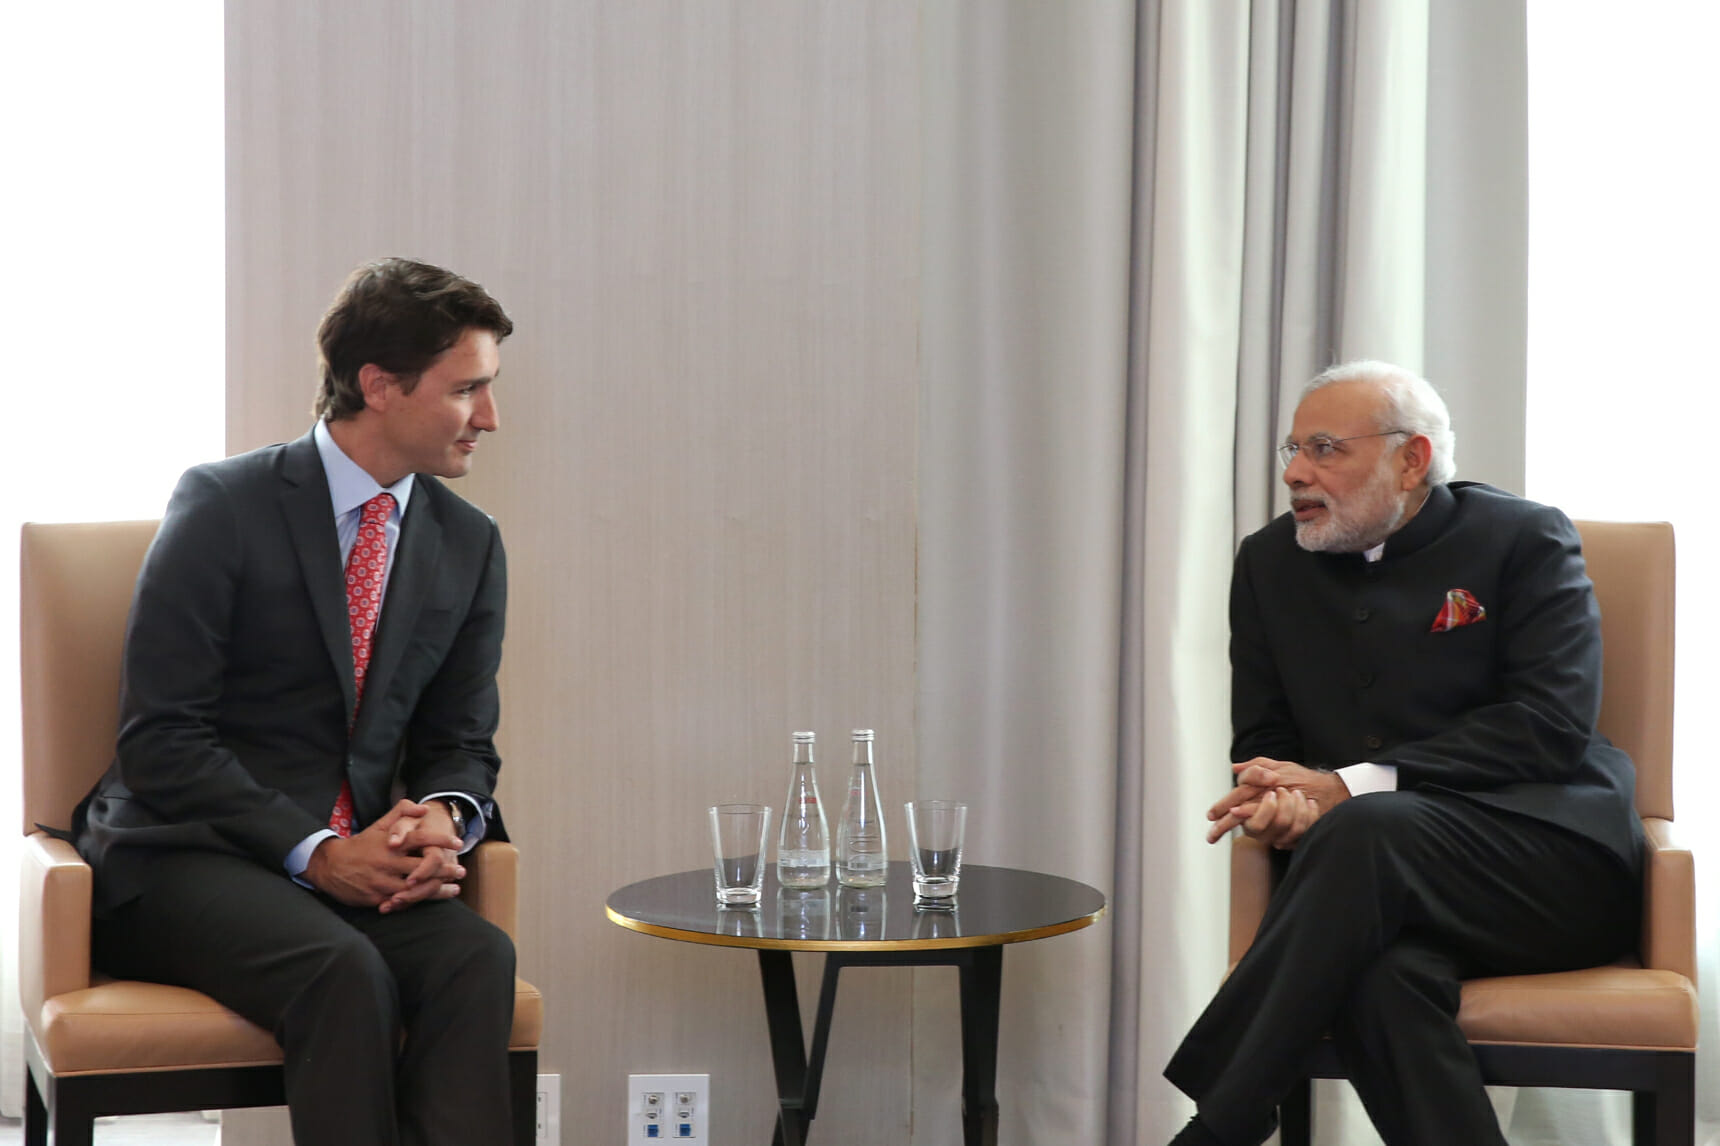 Indian Prime Minister Narendra Modi meets with Justin Trudeau